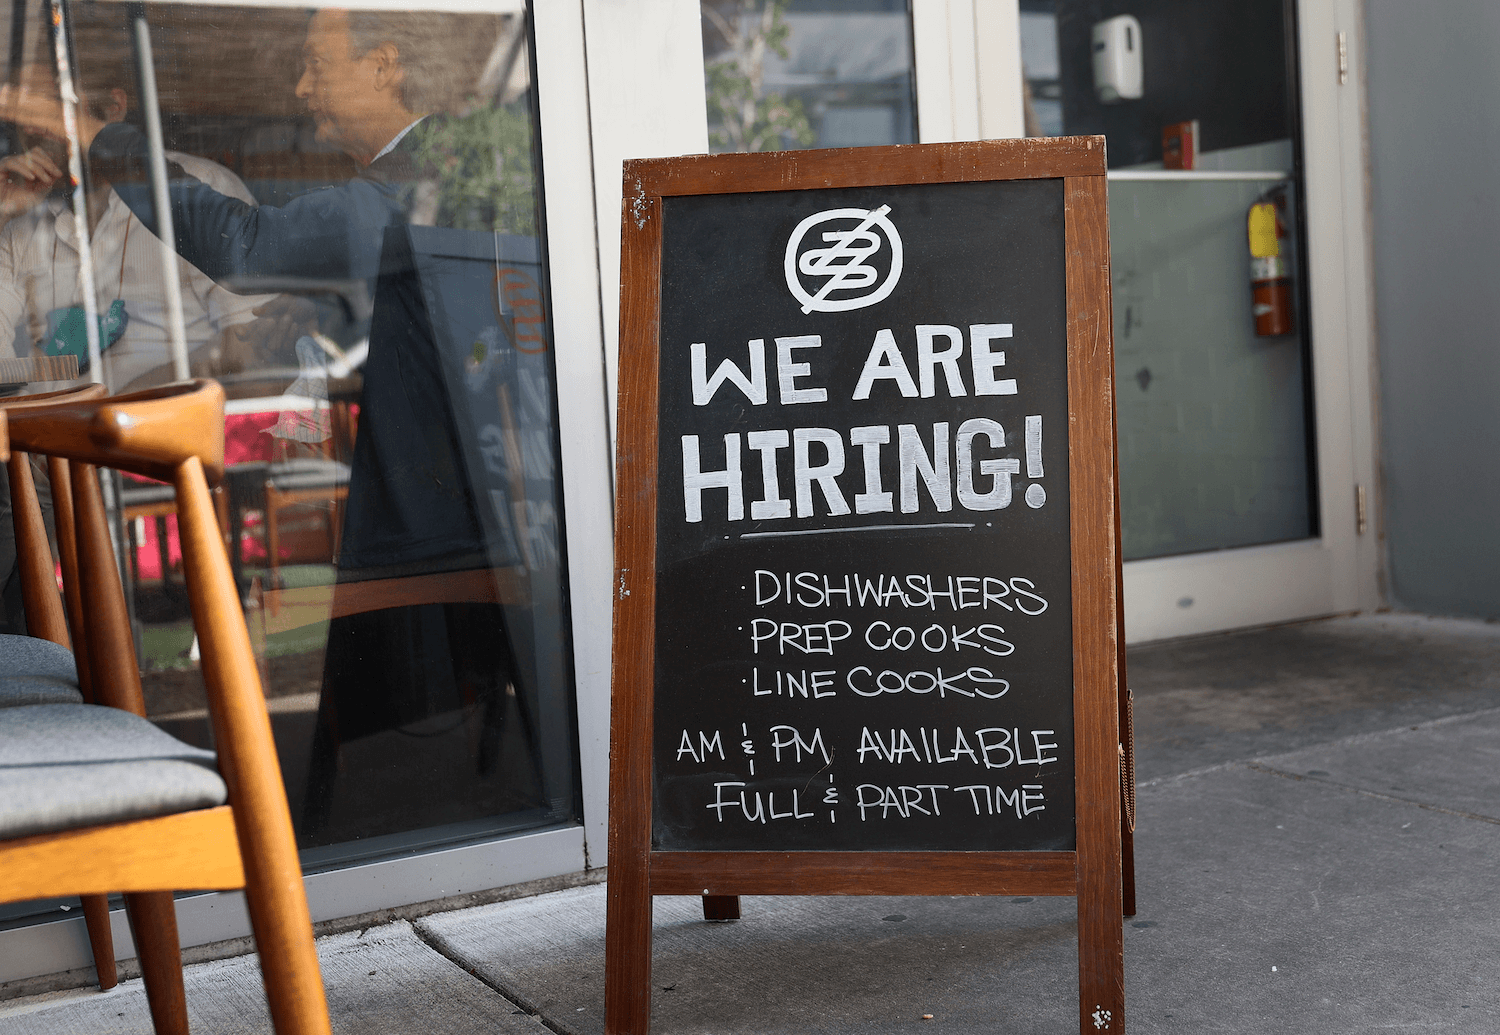 We are hiring dishwashers, prep cooks, line cooks written on a chalkboard sign with a wooden frame, Miami, FL. April 2021